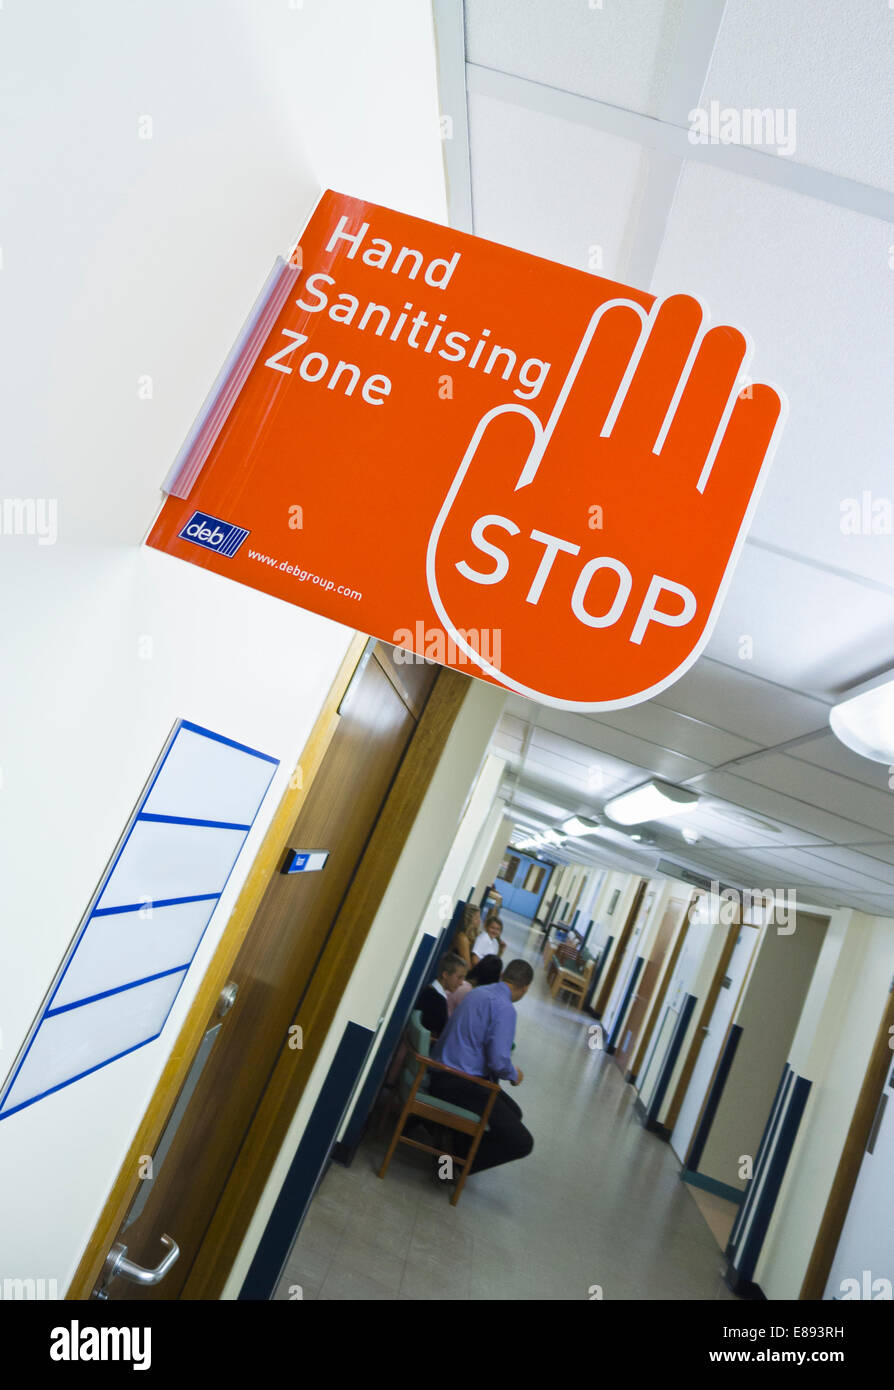 Hand Sanitizing Zone warning sign in a hospital. Stock Photo